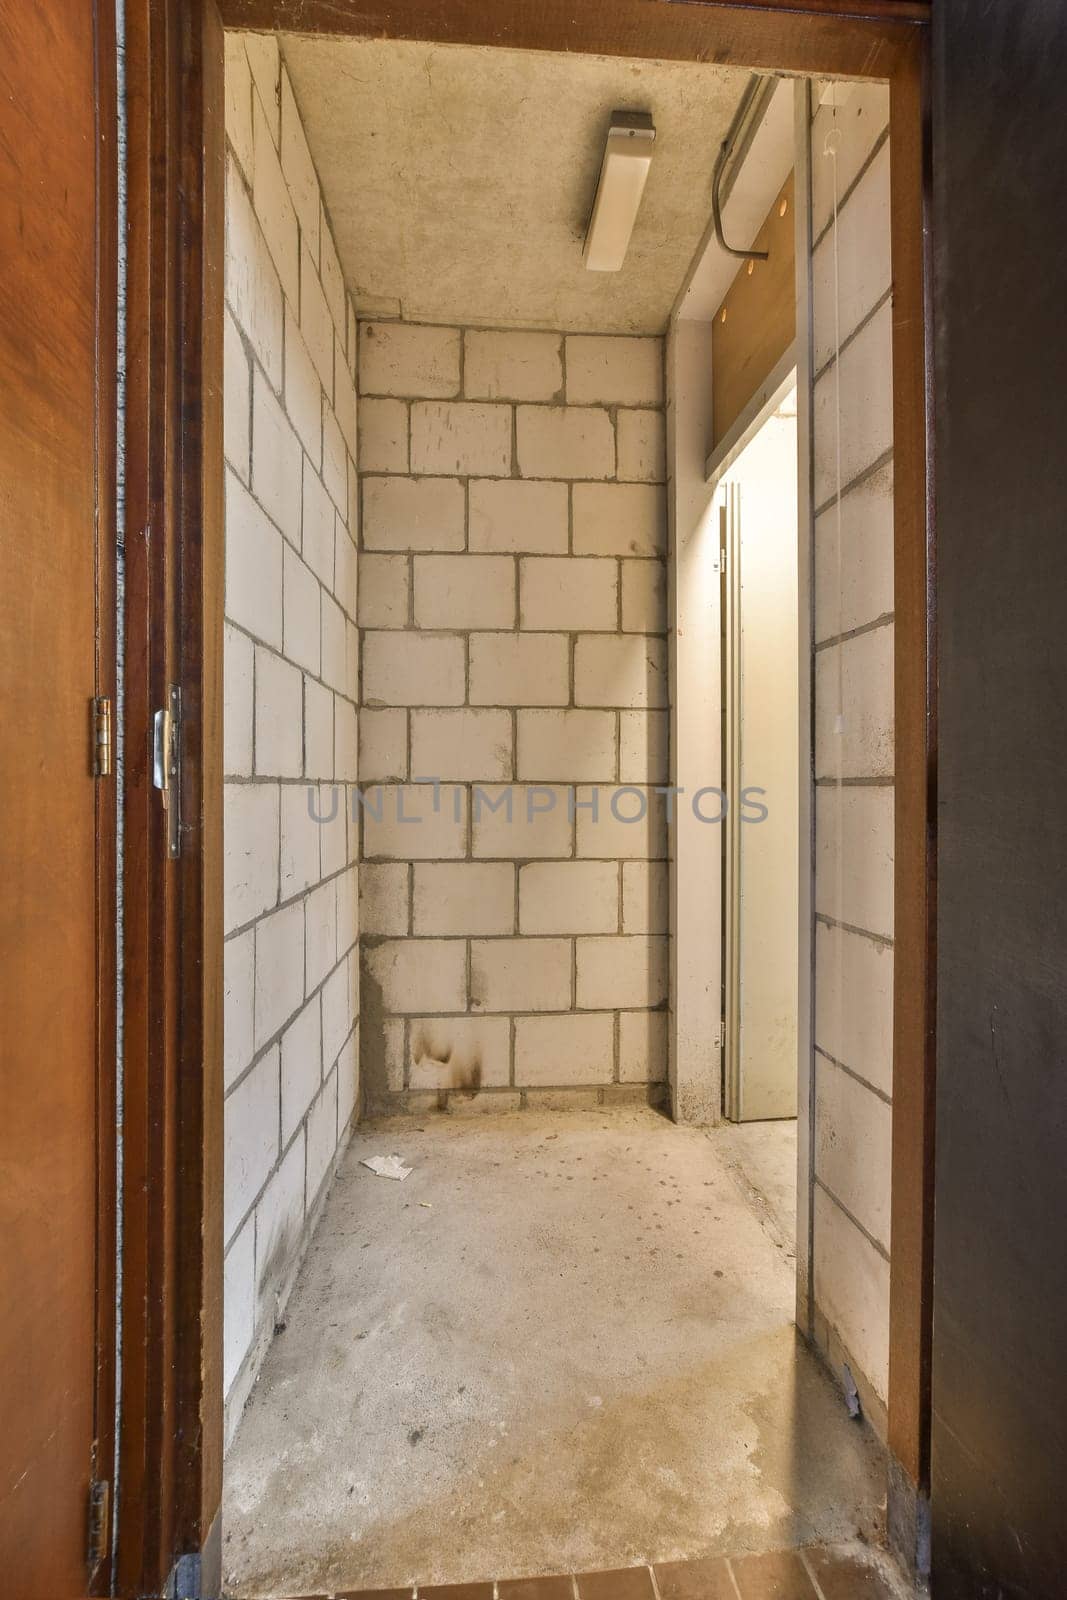 the inside of an empty room with no one person or objects on the floor and door to the other room